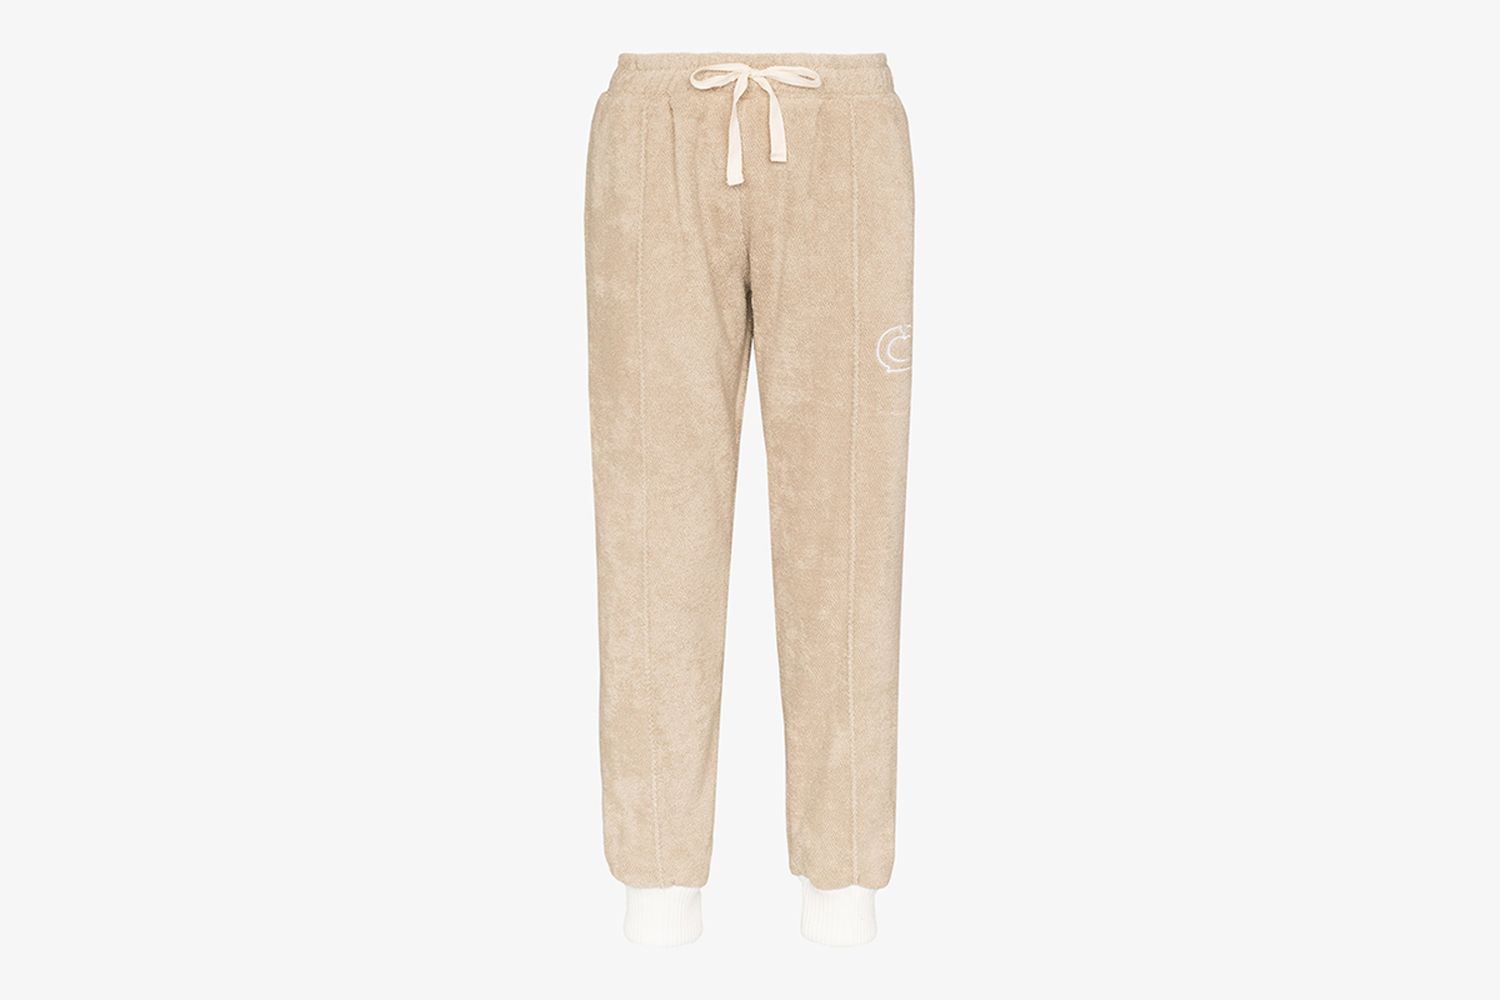 Shop These Neutral Clothing Highlights at Browns Now